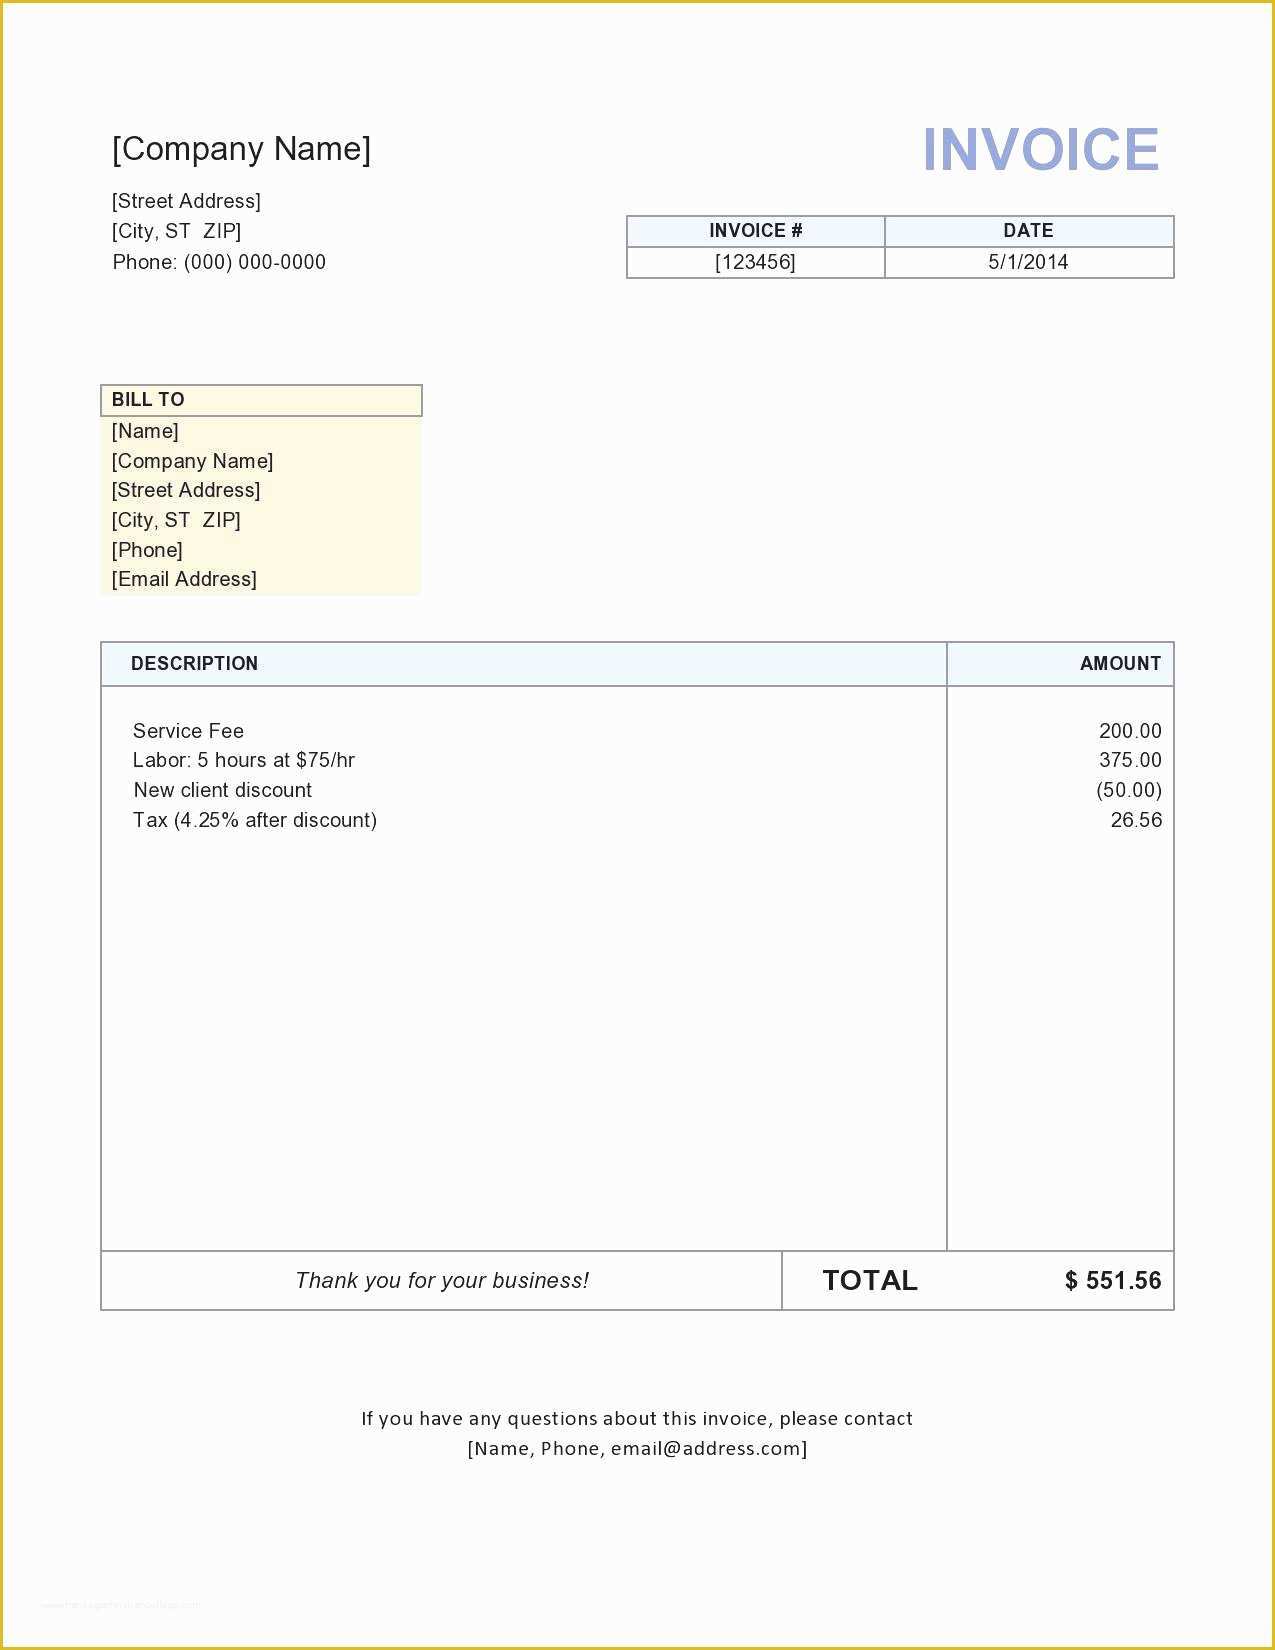 Free Excel Invoice Template Mac Of Generic Invoice Template Word Birth Certificate Receipt